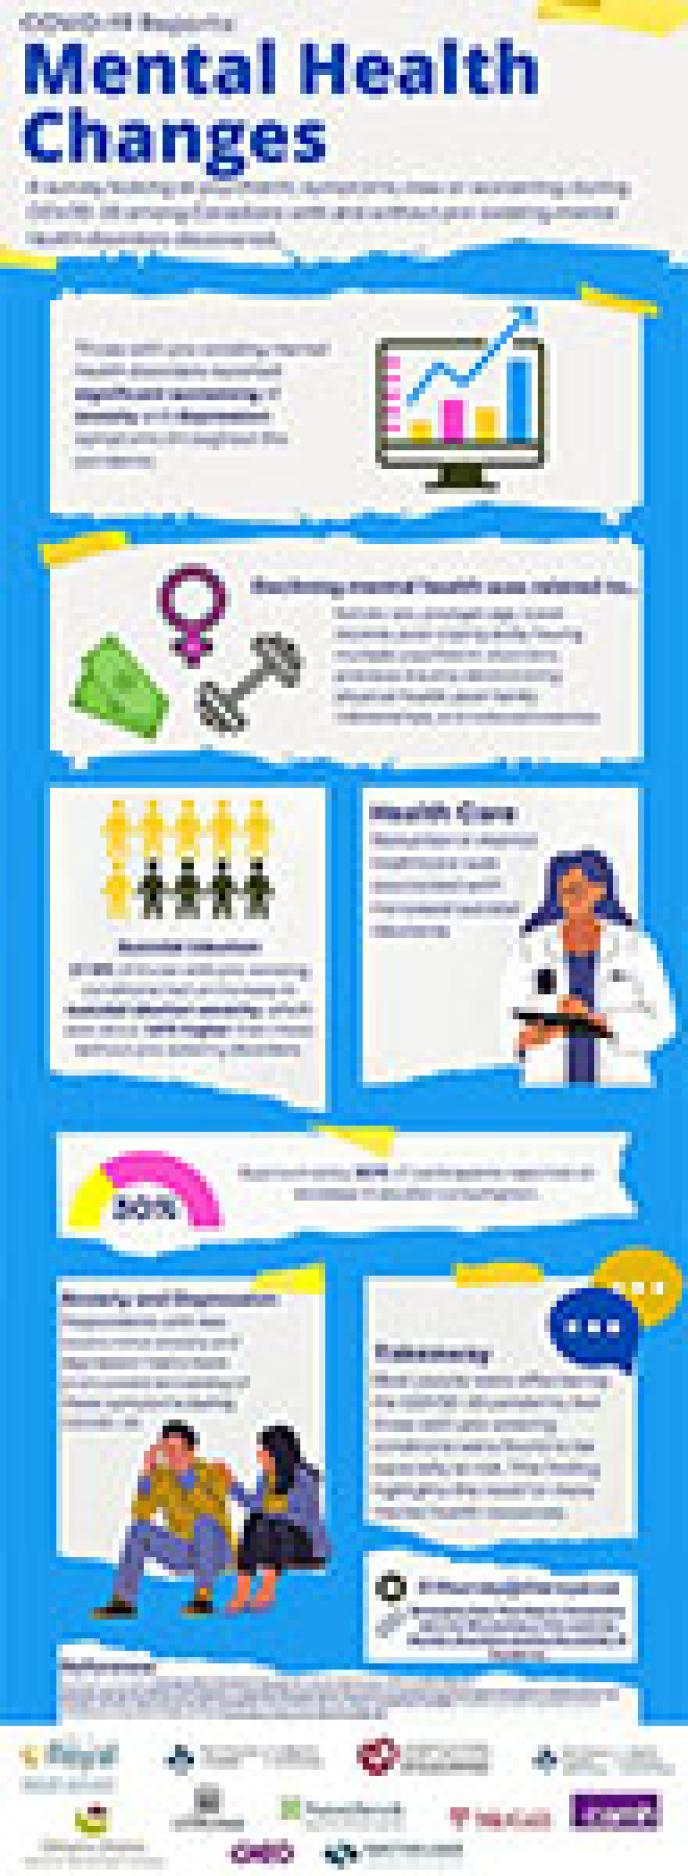 Mental health changes during COVID-19 infographic